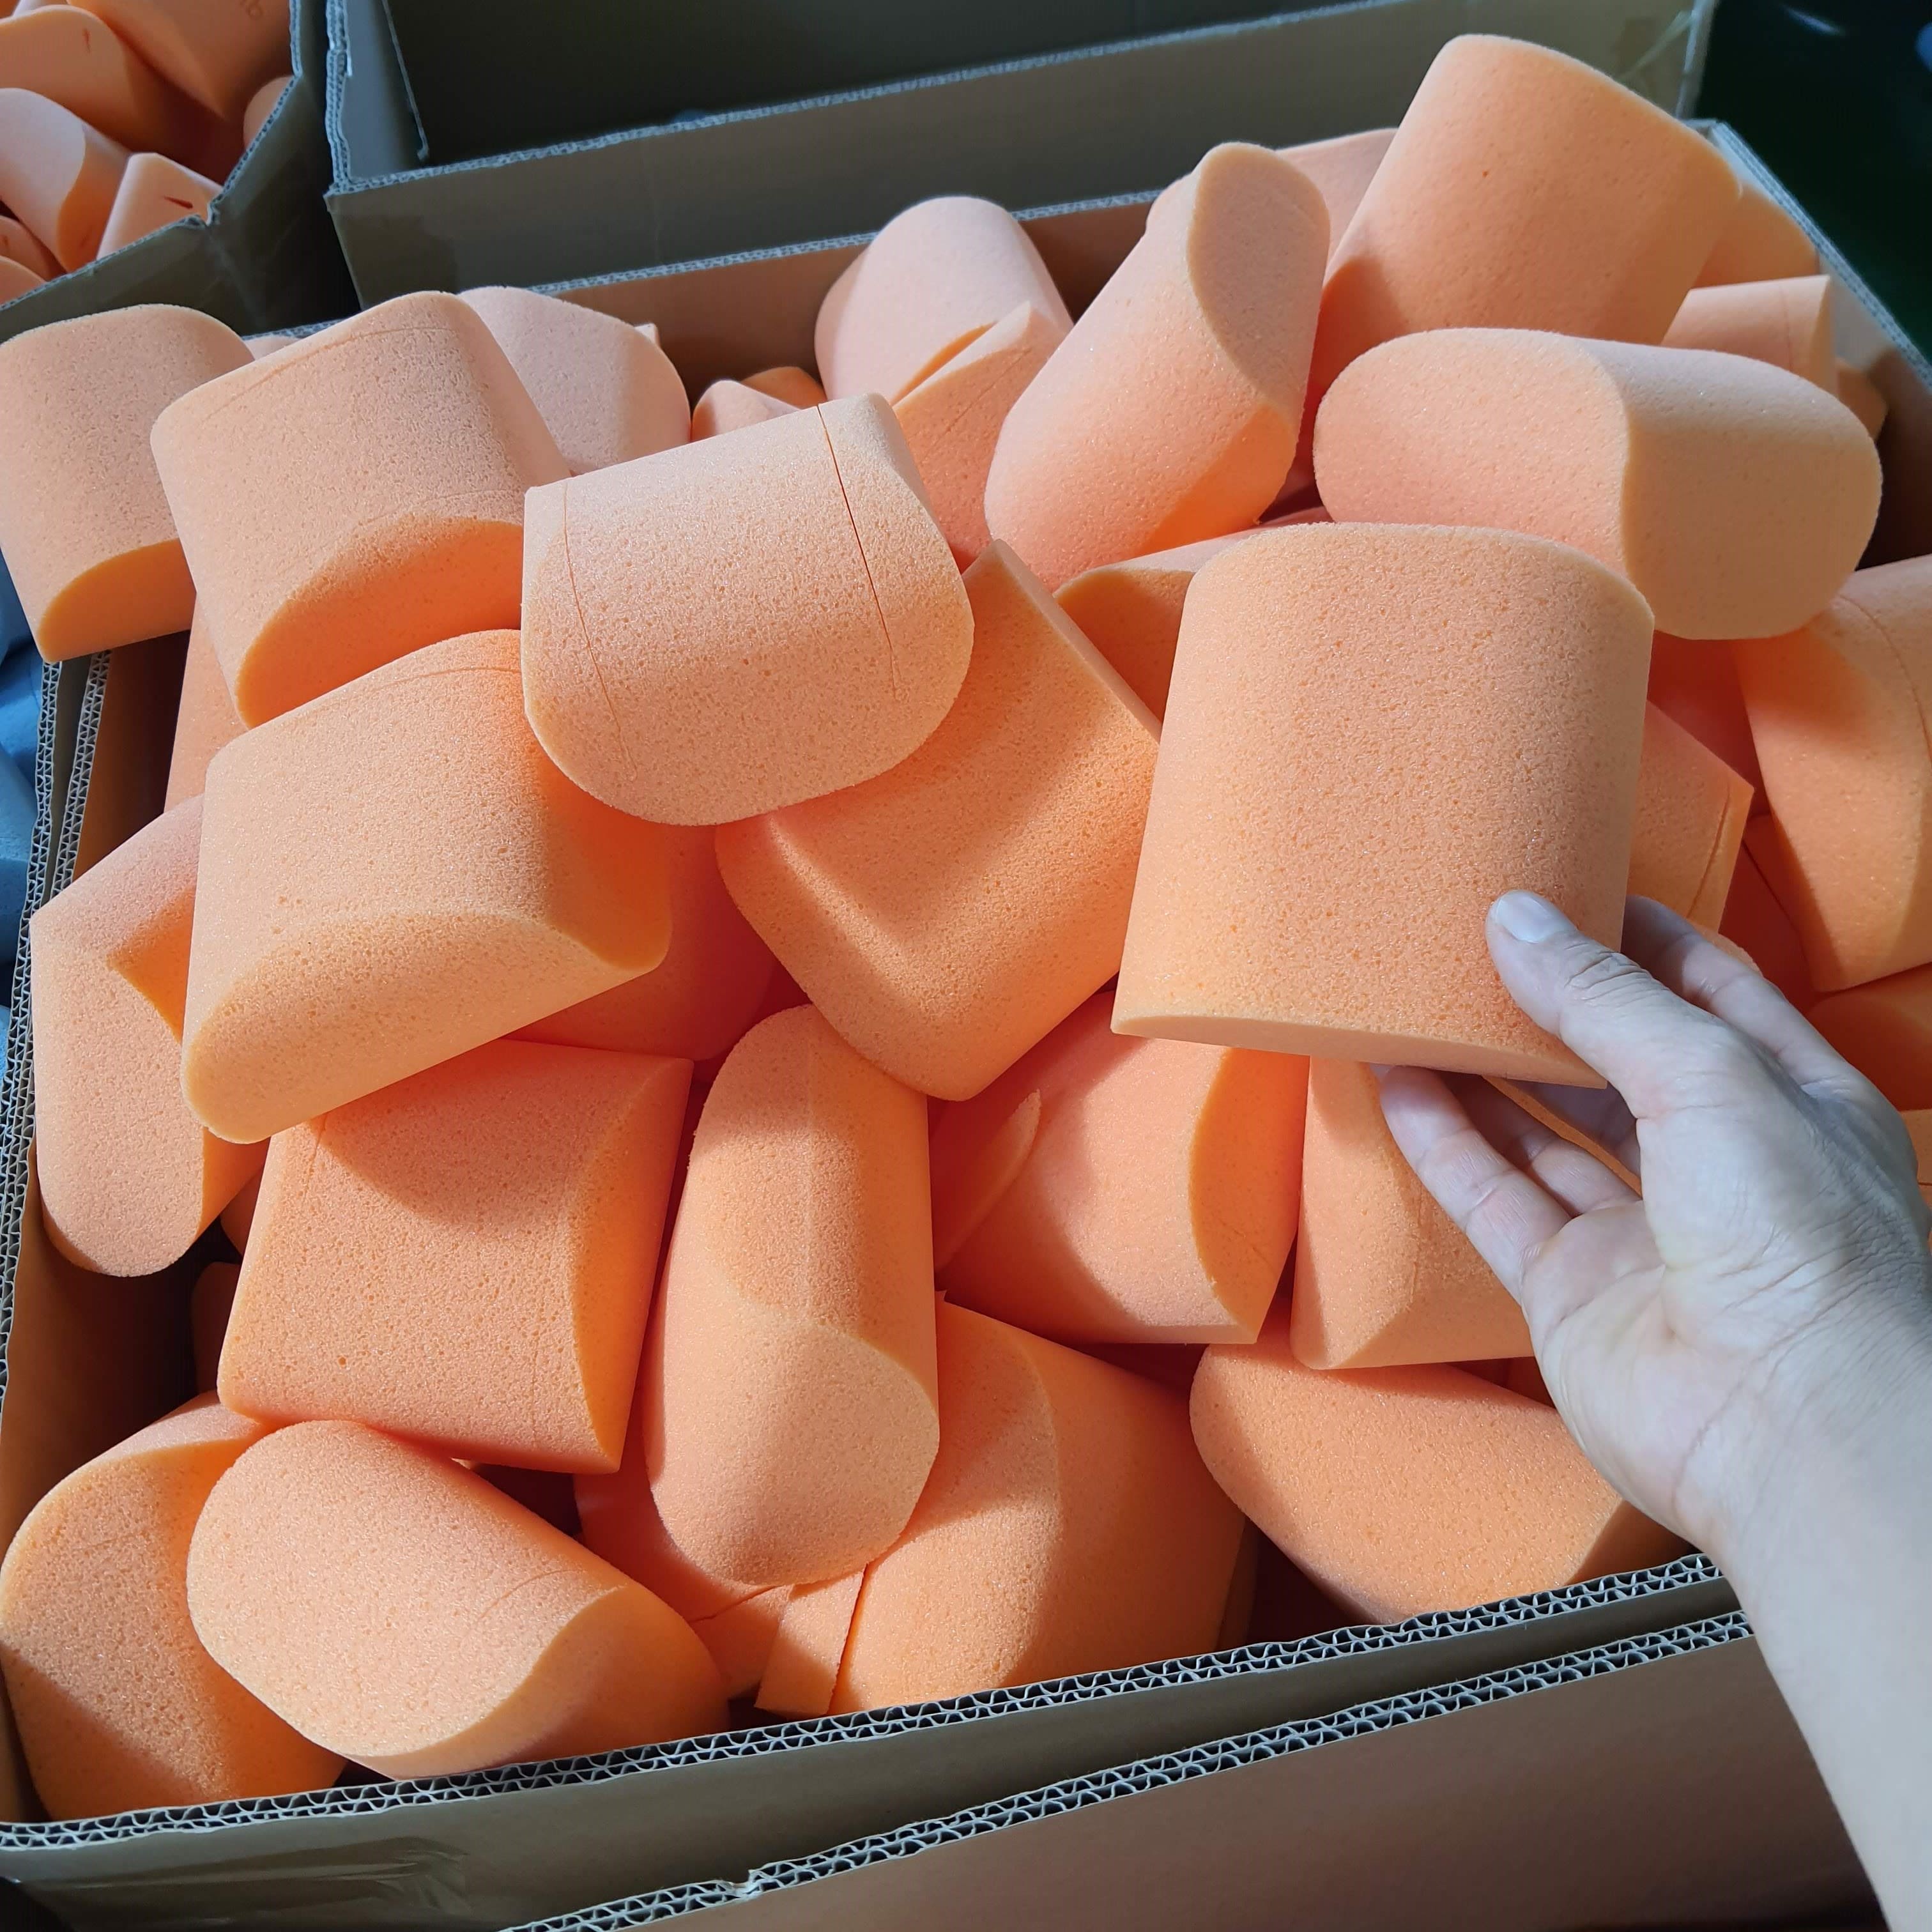  View larger image Add to Compare  Share Polyurethane Foam Good Quality Excellent Materials Home Goods PU Carton Made in Vietnam Manufacturer